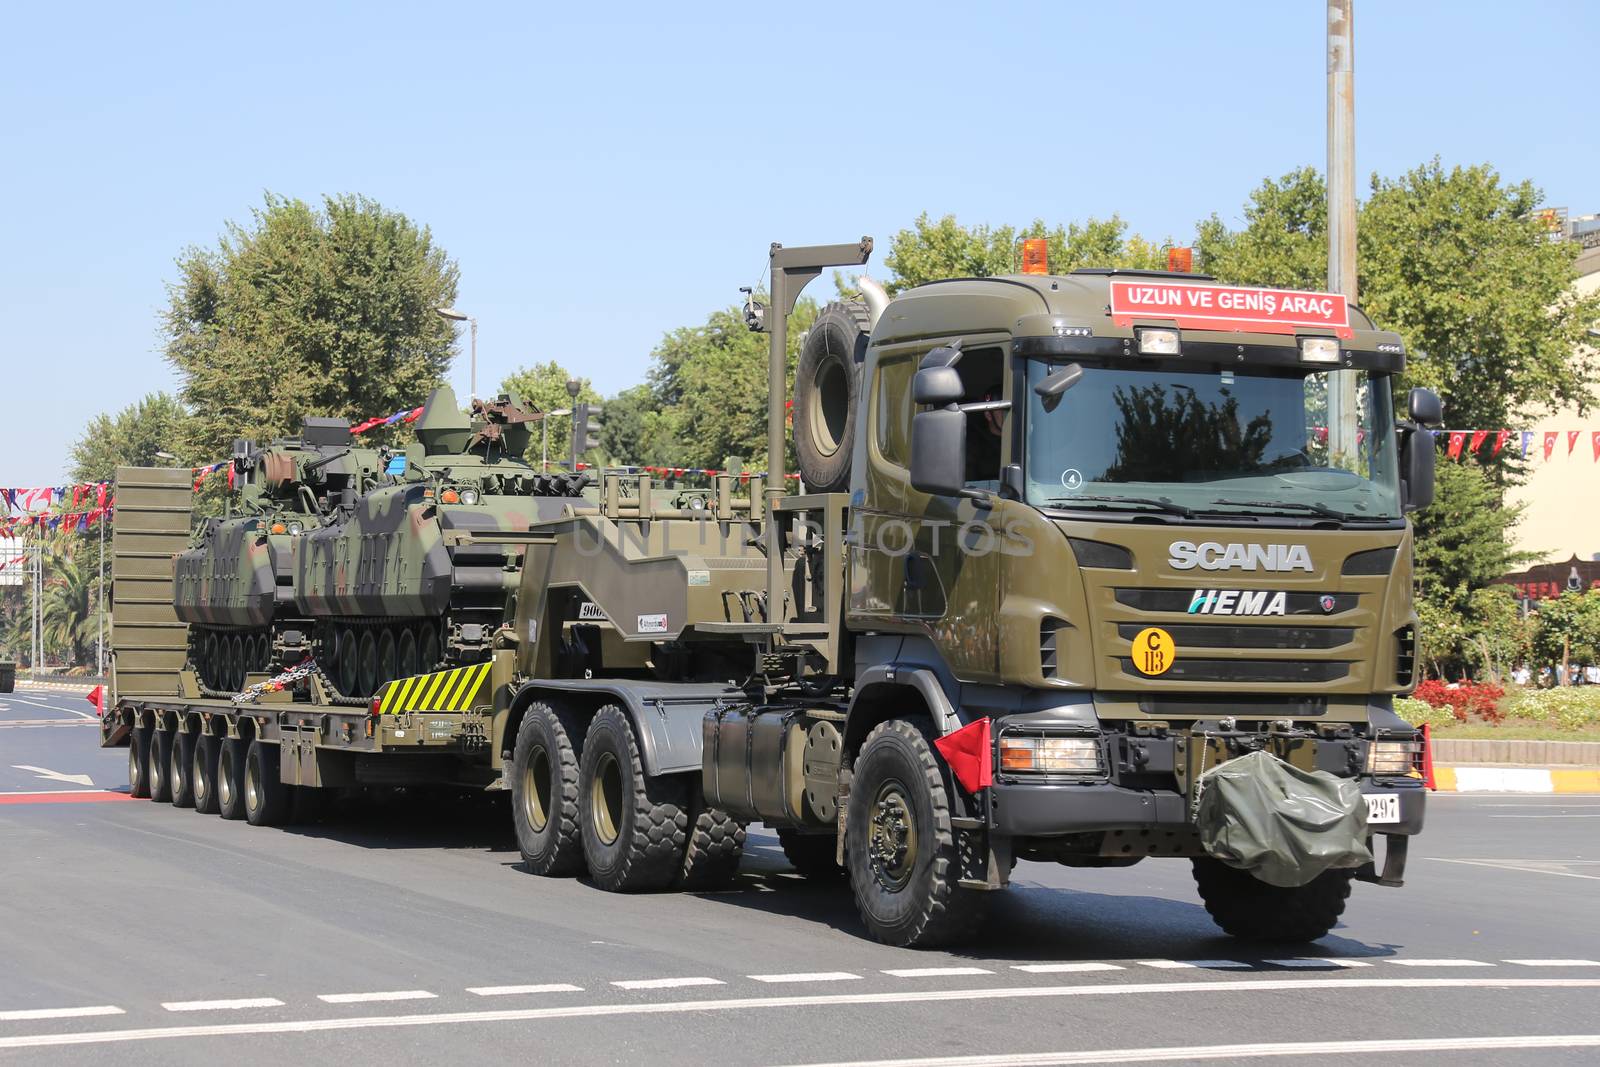 ISTANBUL, TURKEY - AUGUST 30, 2015: Military vehicle during 93th anniversary of 30 August Turkish Victory Day parade on Vatan Avenue